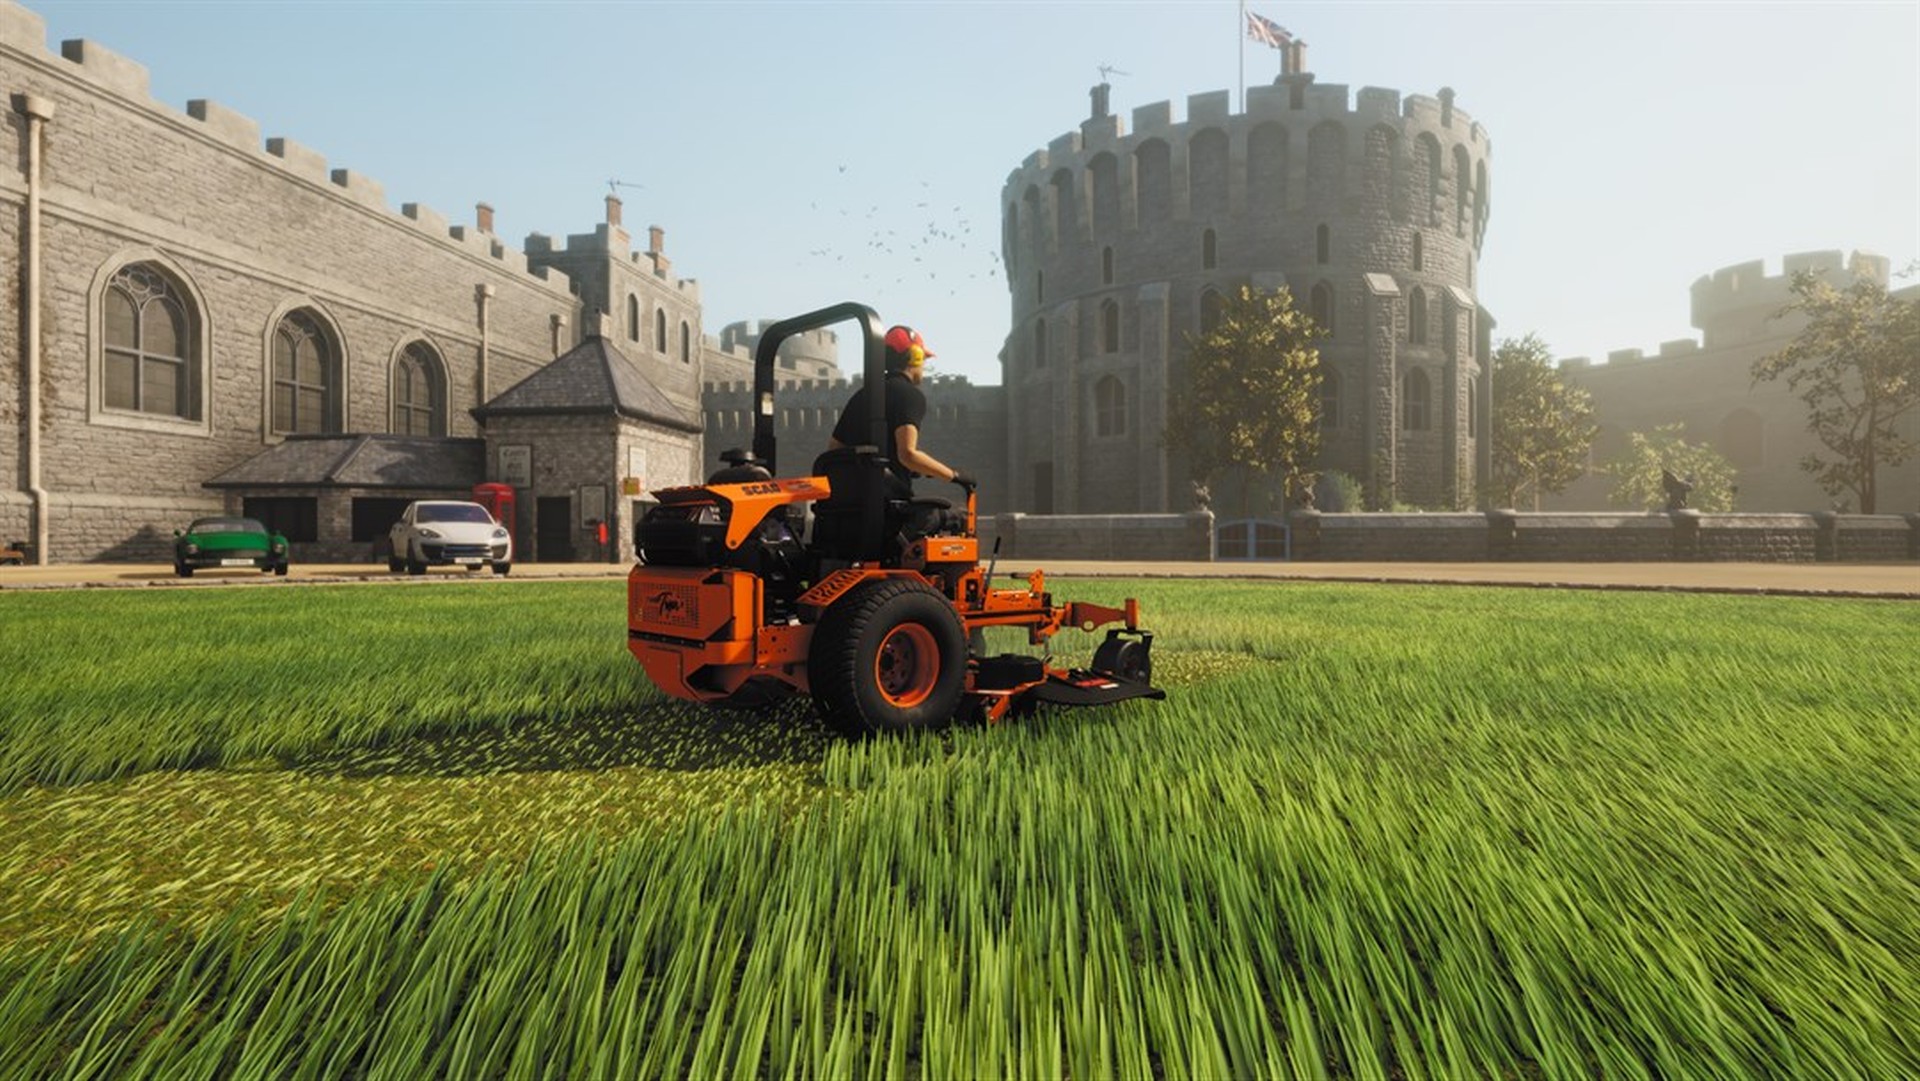 Lawn Mowing Simulator – August 10 - Optimized for Xbox Series X|S